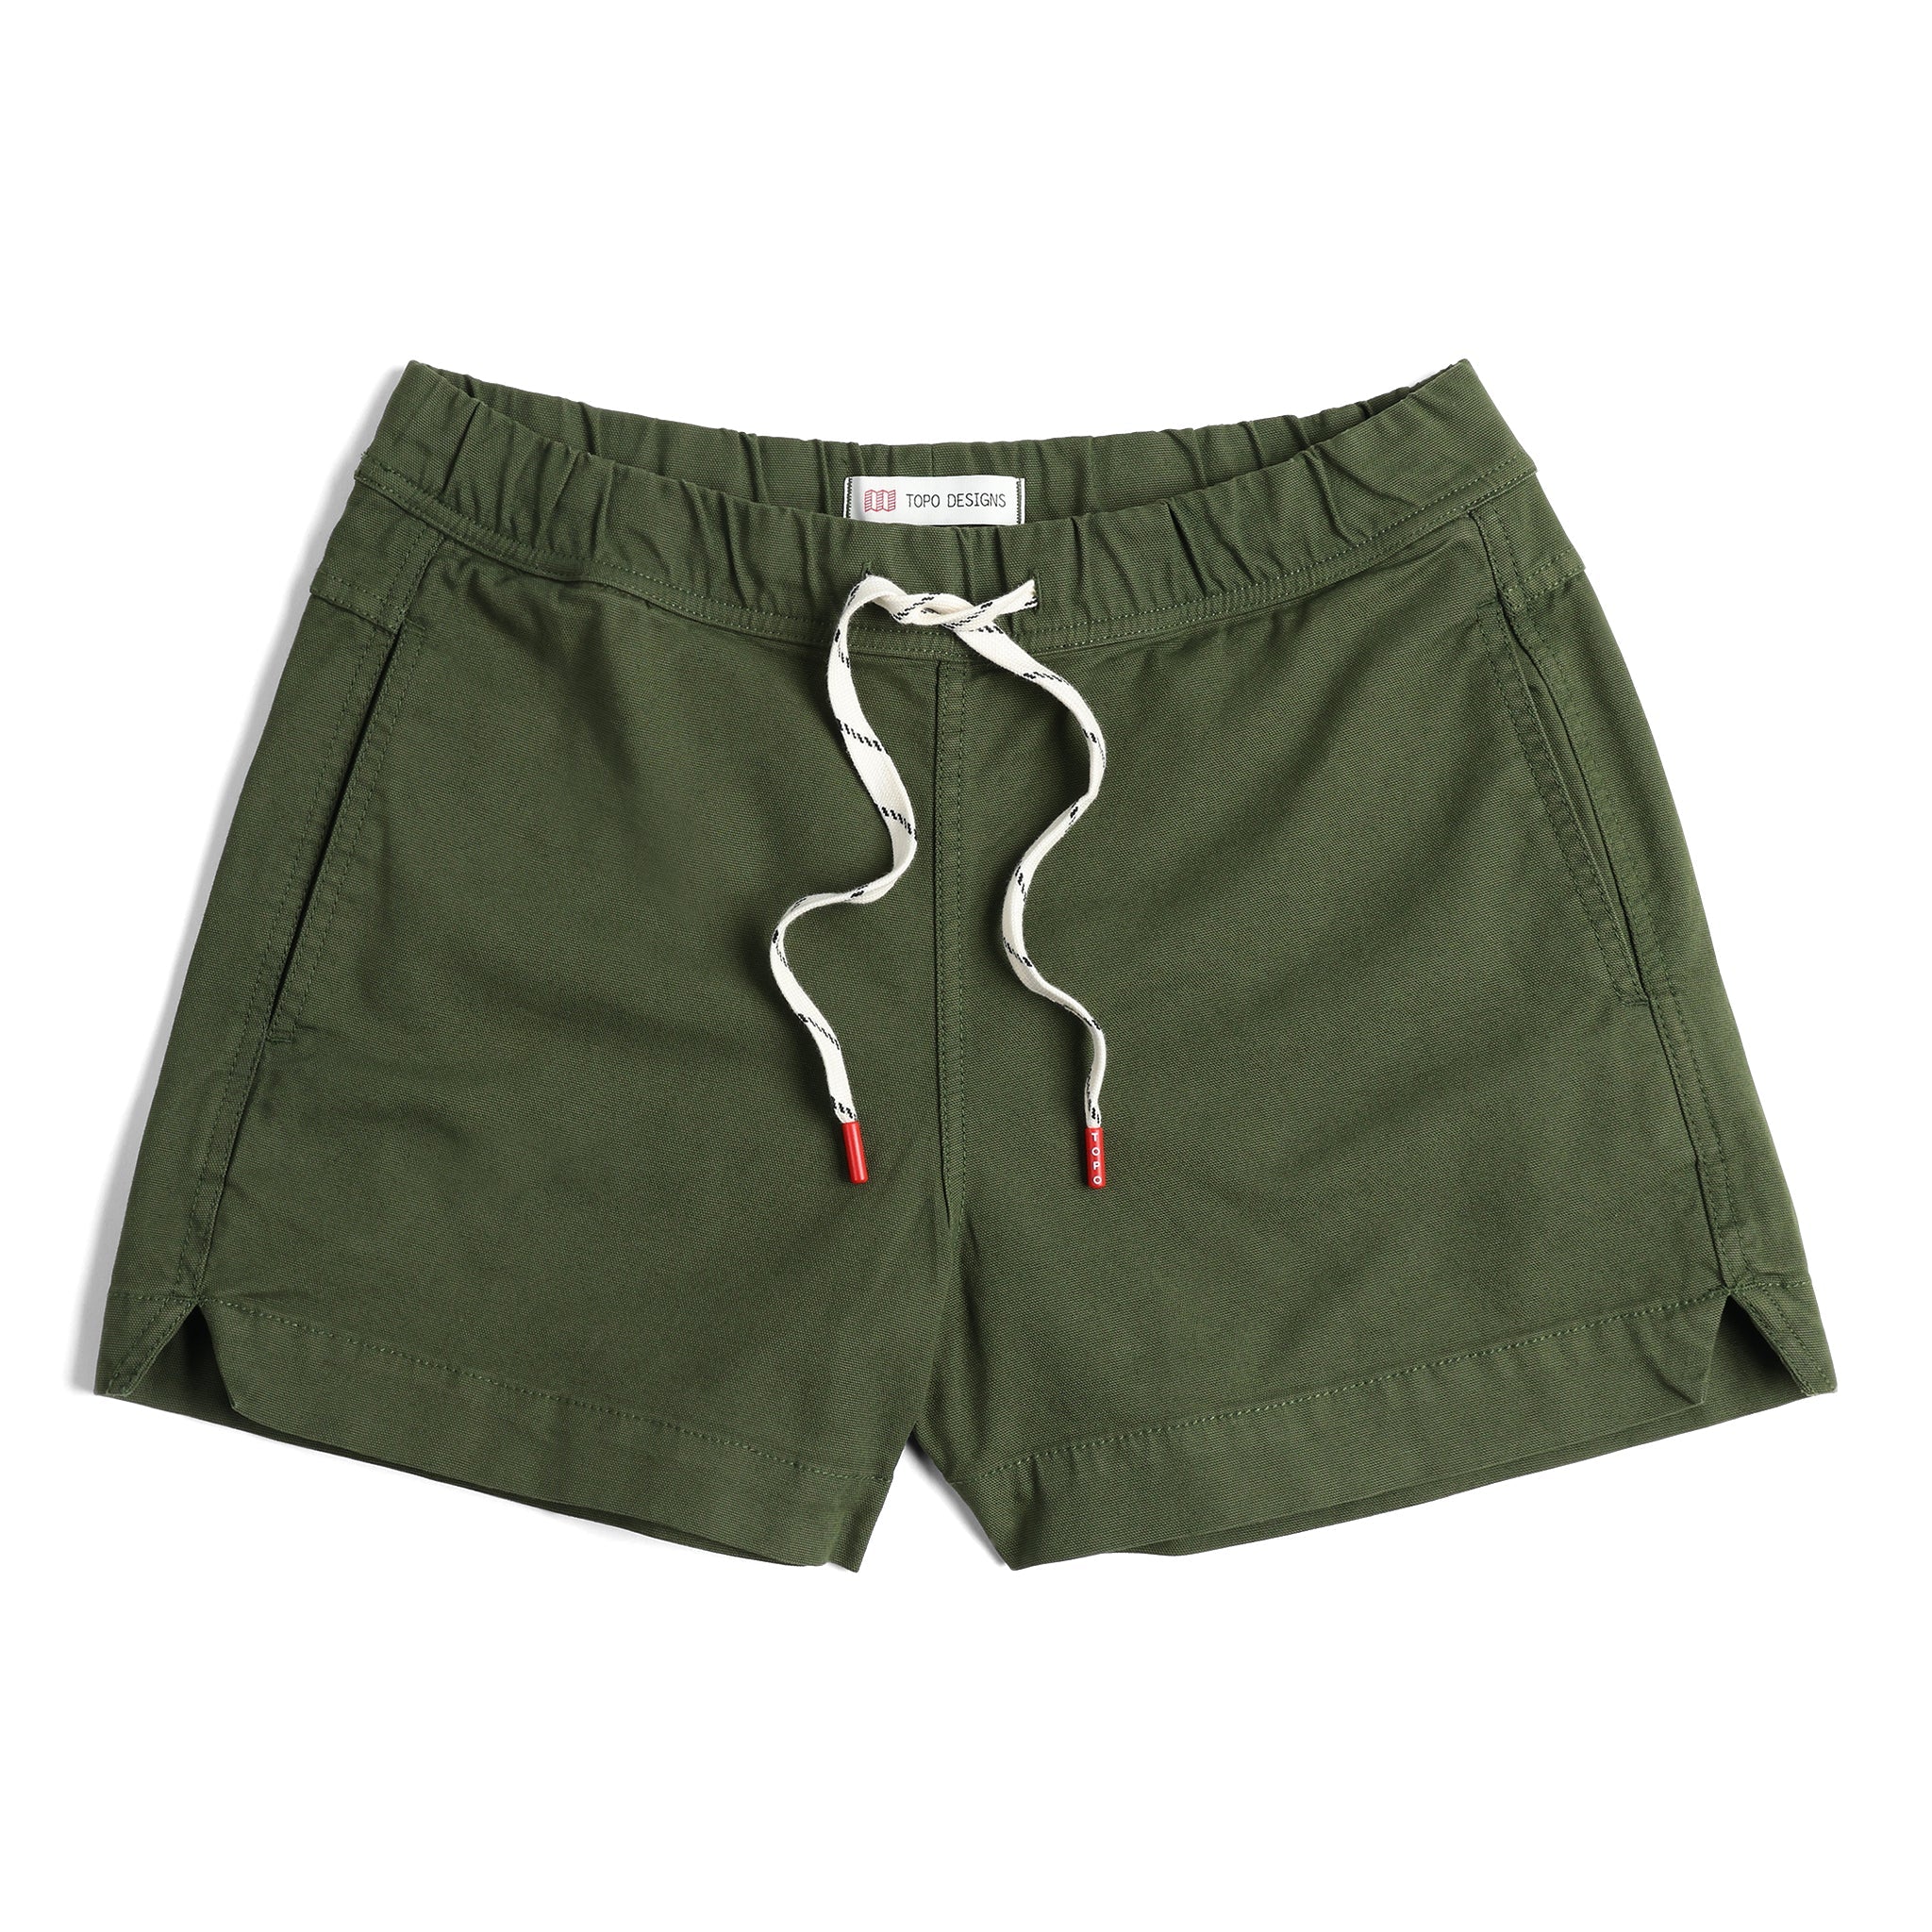 Front View of Topo Designs Dirt Shorts - Women's in "Olive"